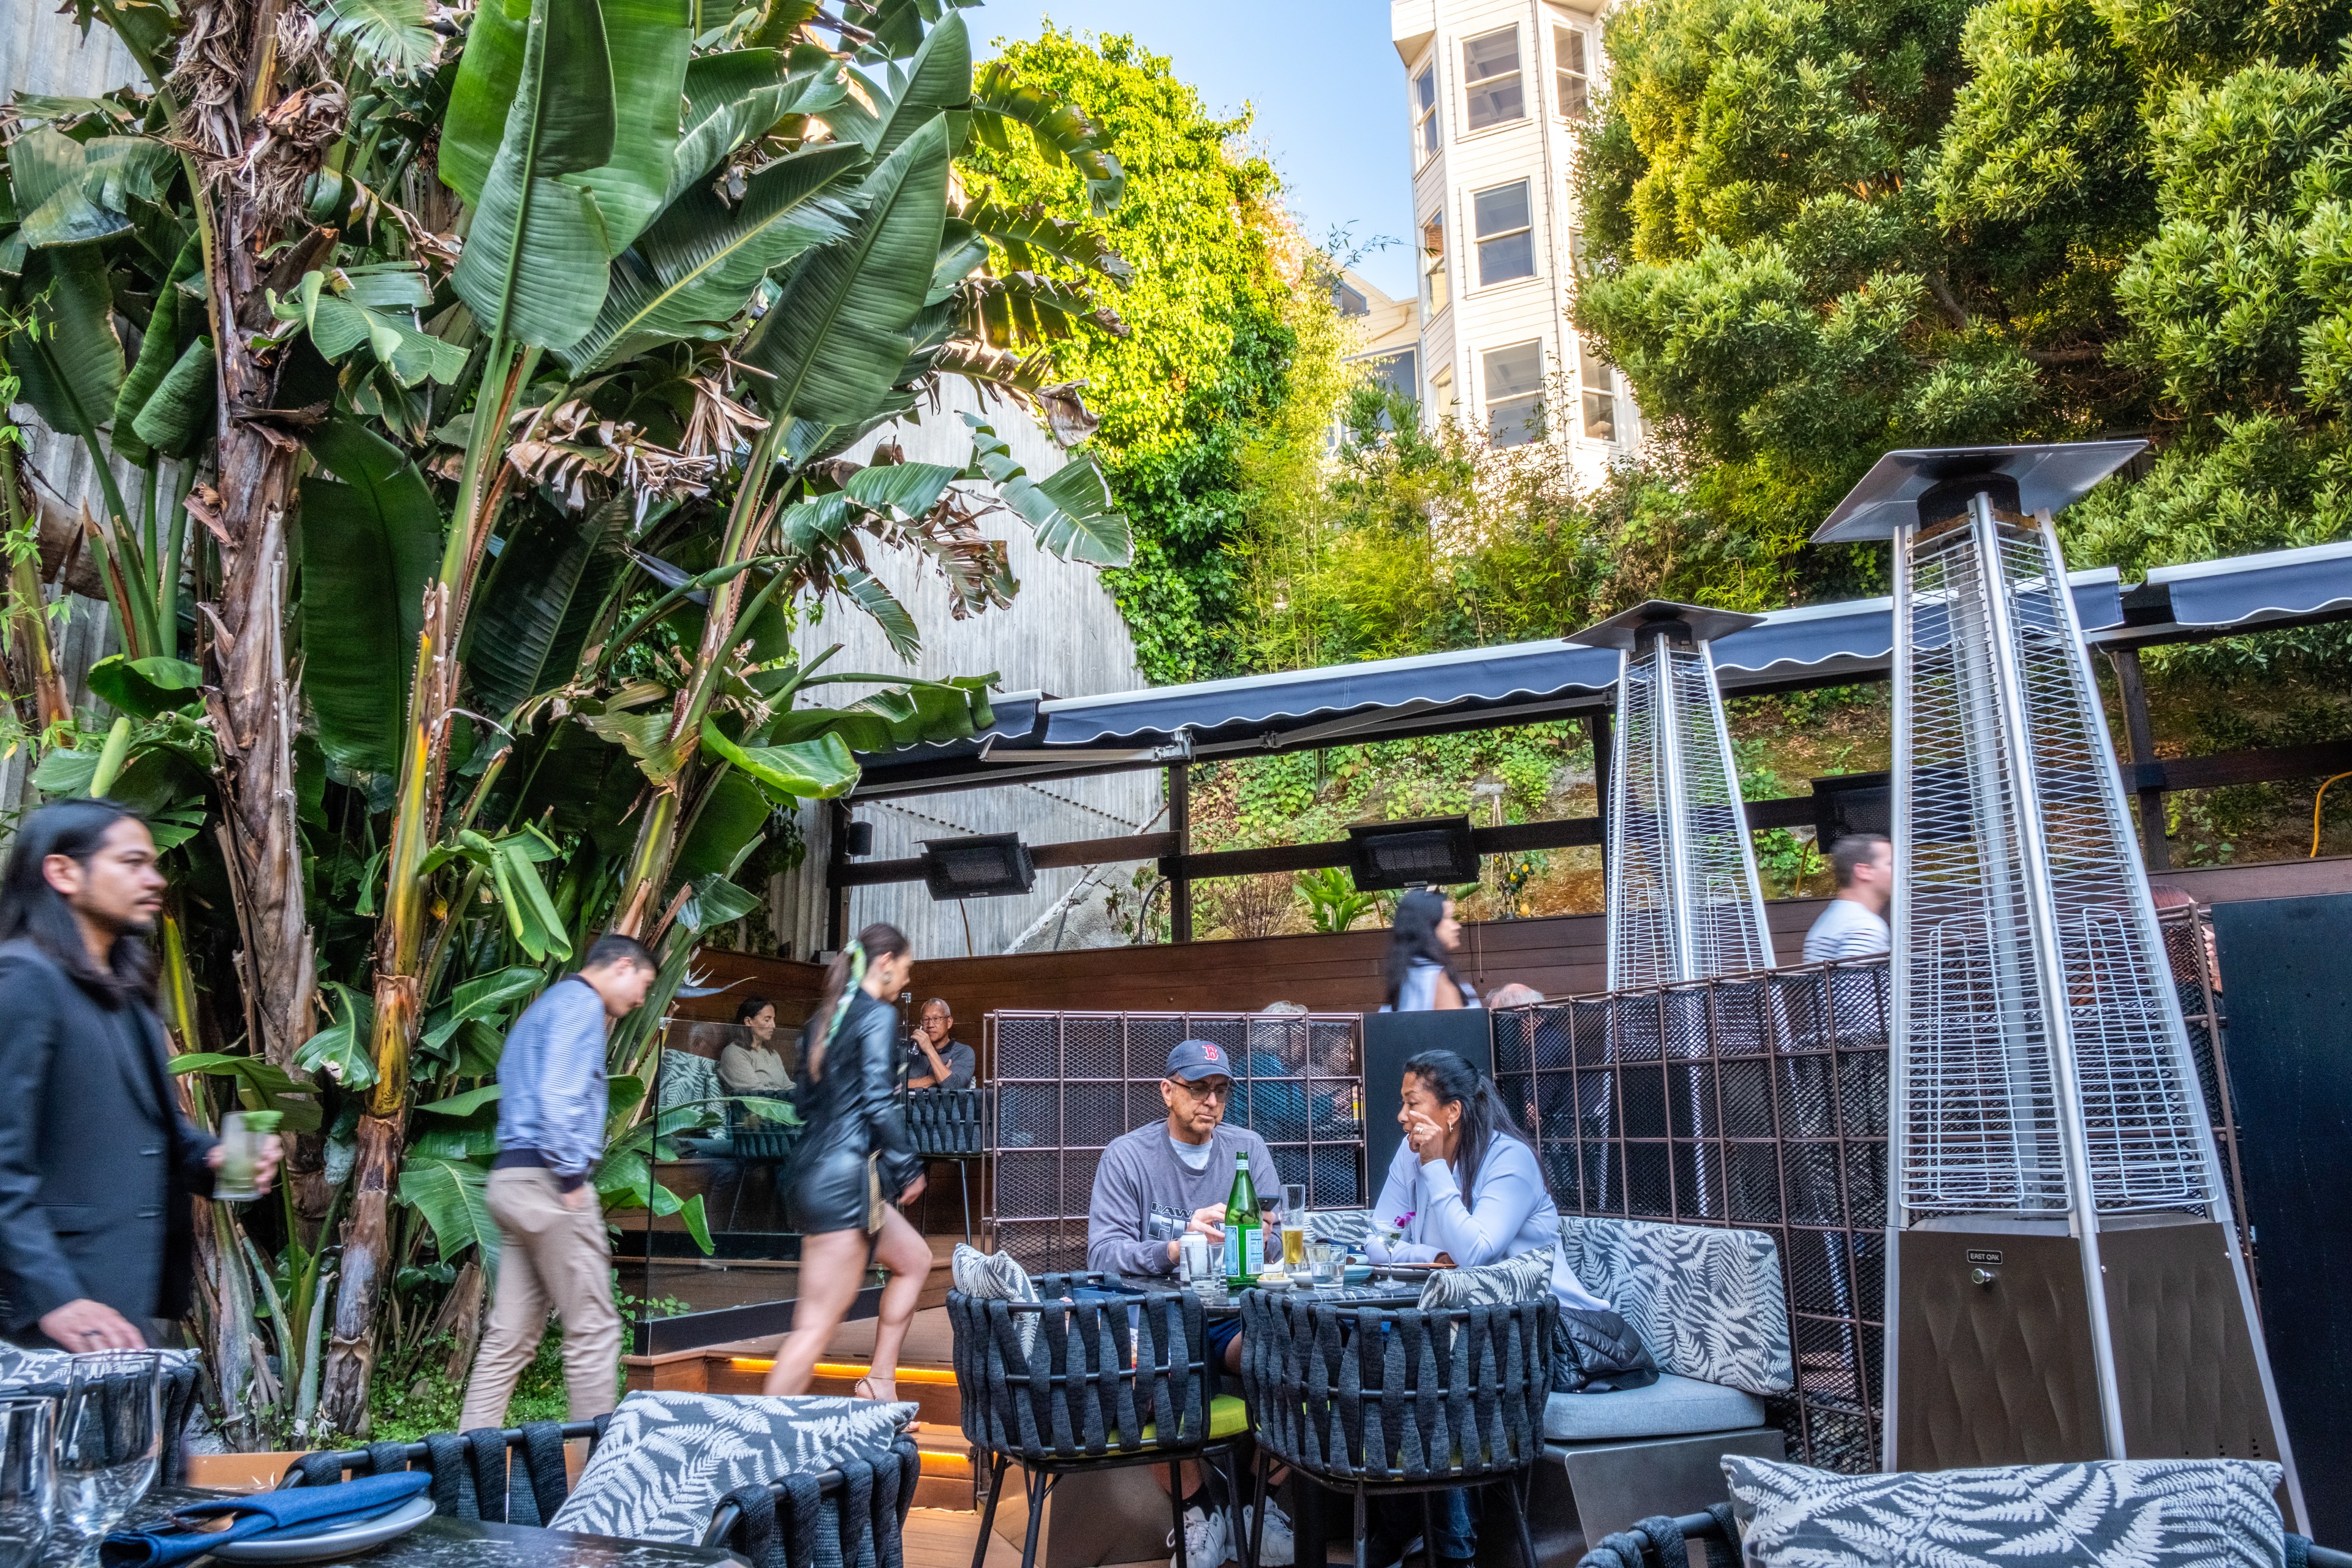 An outdoor restaurant setting with tropical plants, people sitting and eating at tables, and heaters around. Some patrons walk by while others sit and converse.